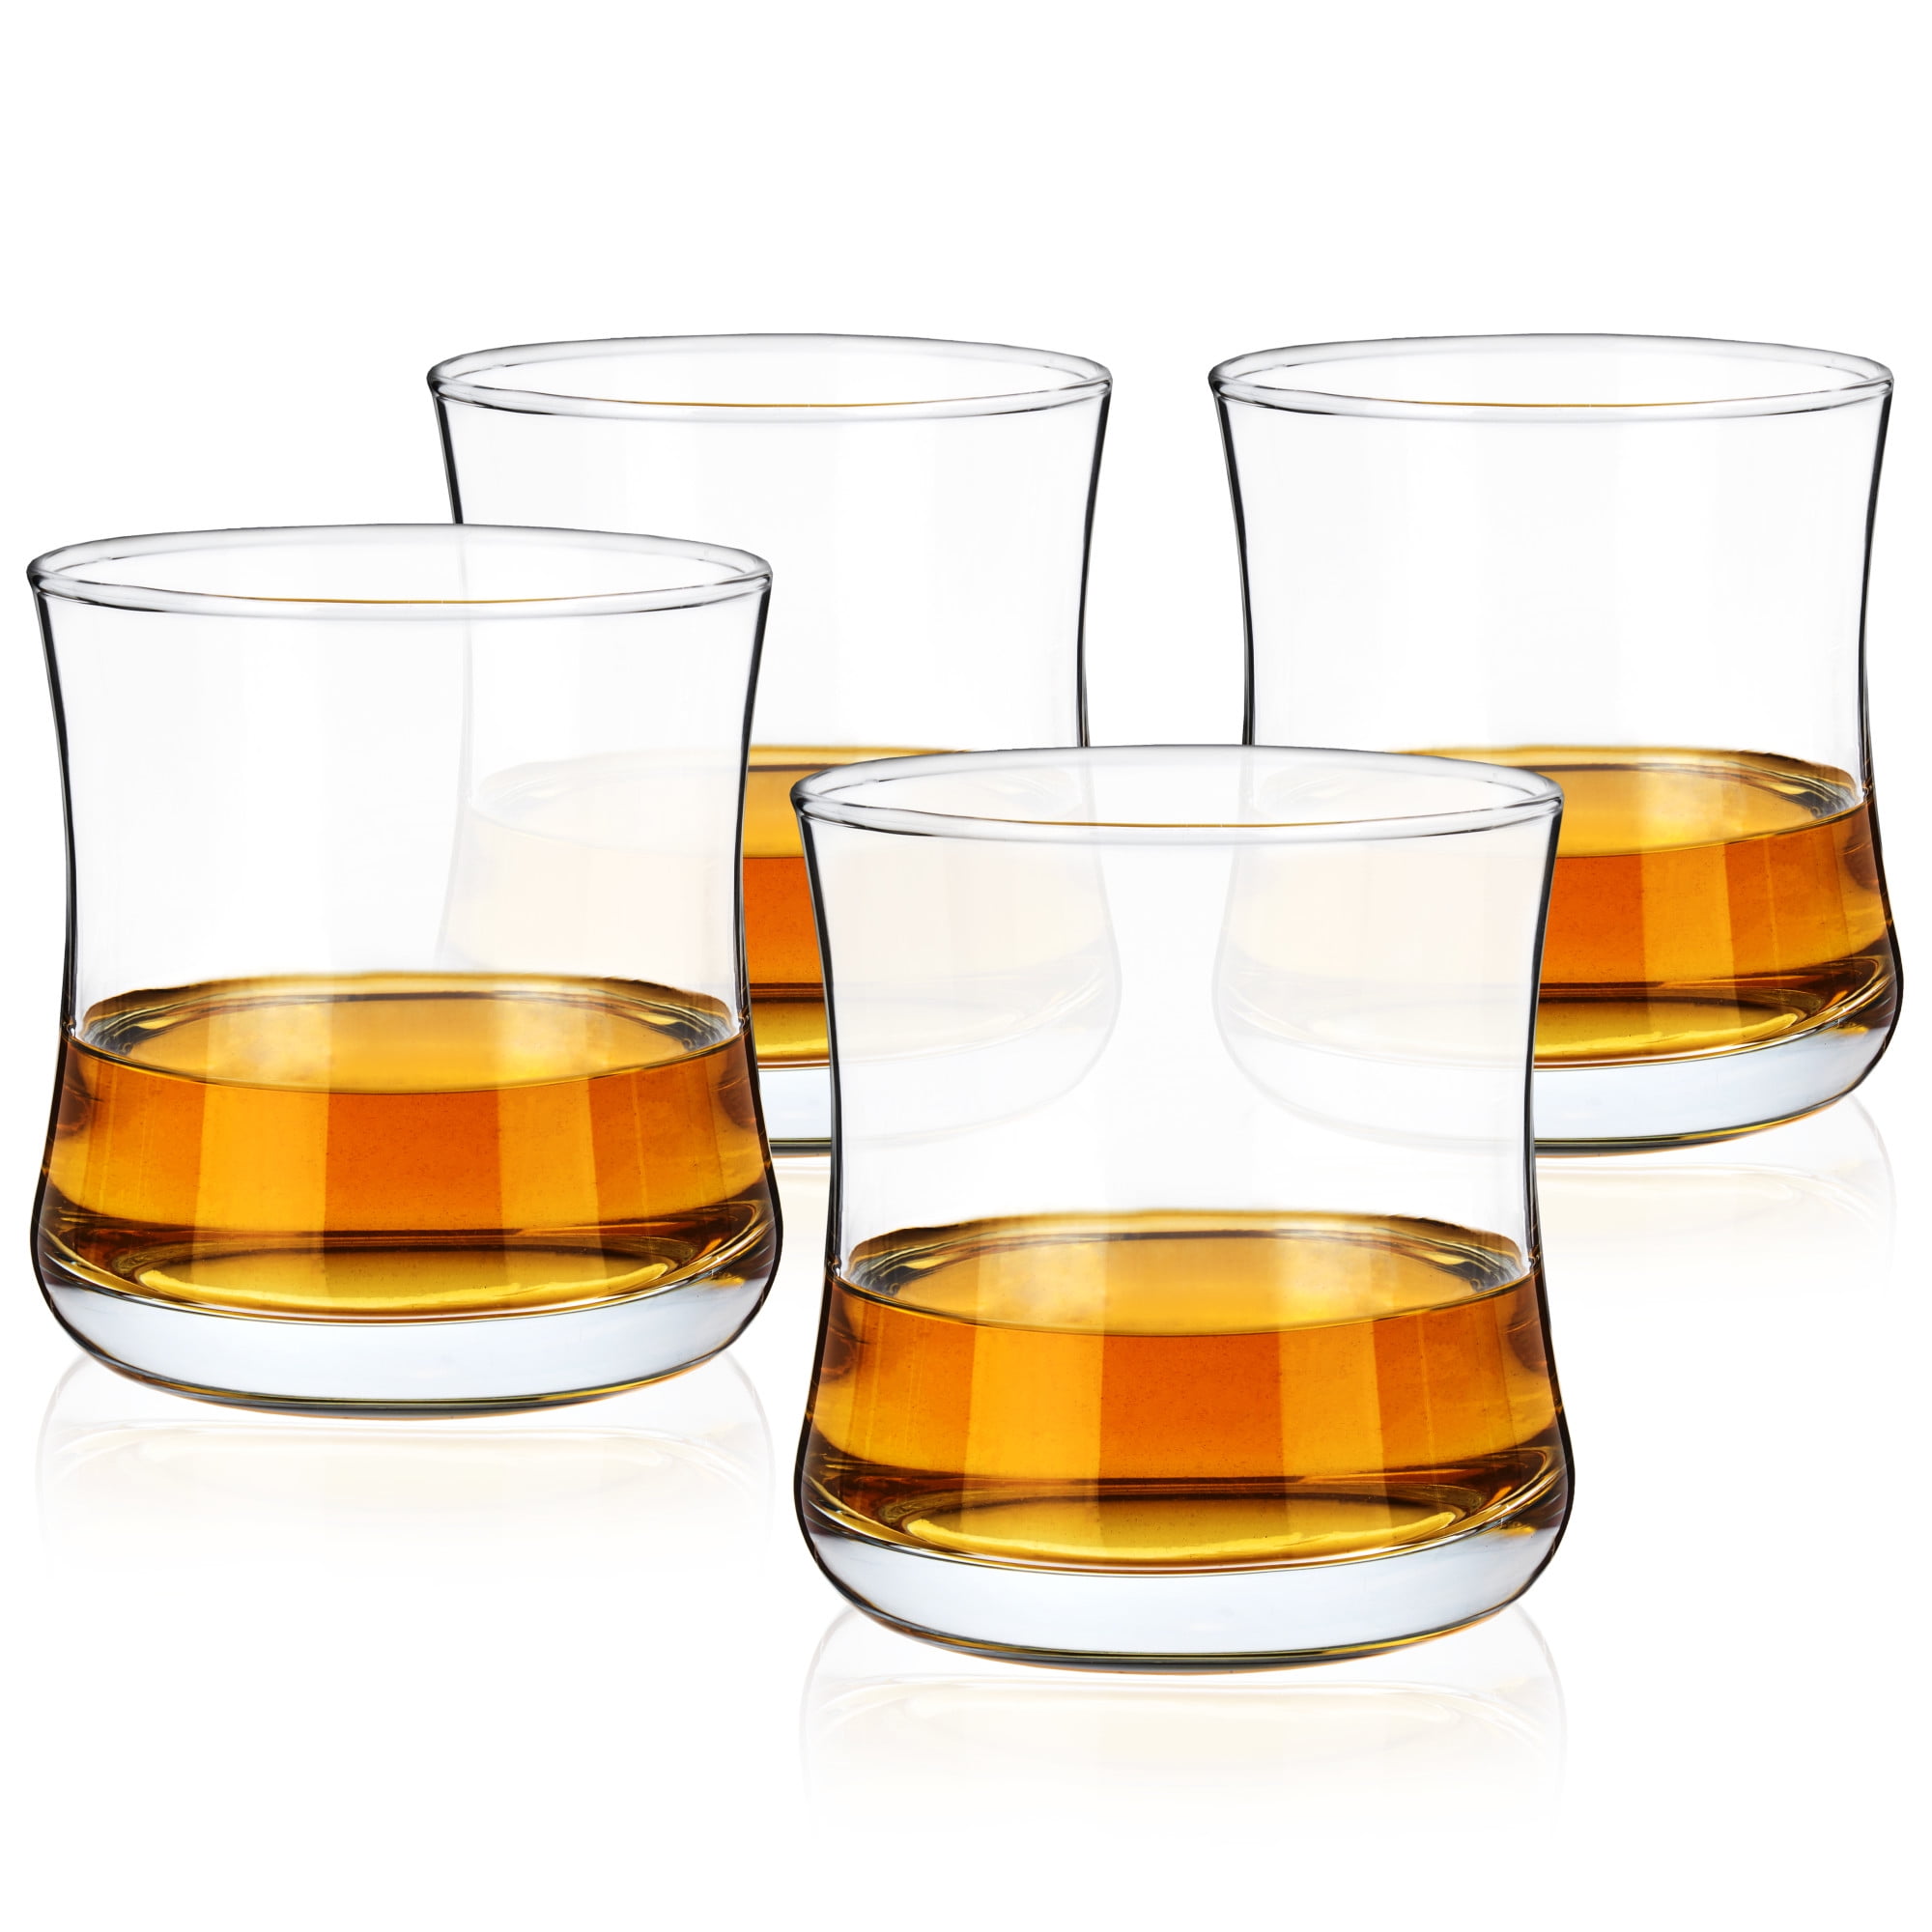 True Bourbon Glasses, Tumblers for Whiskey, Scotch, Curved Stylish ...